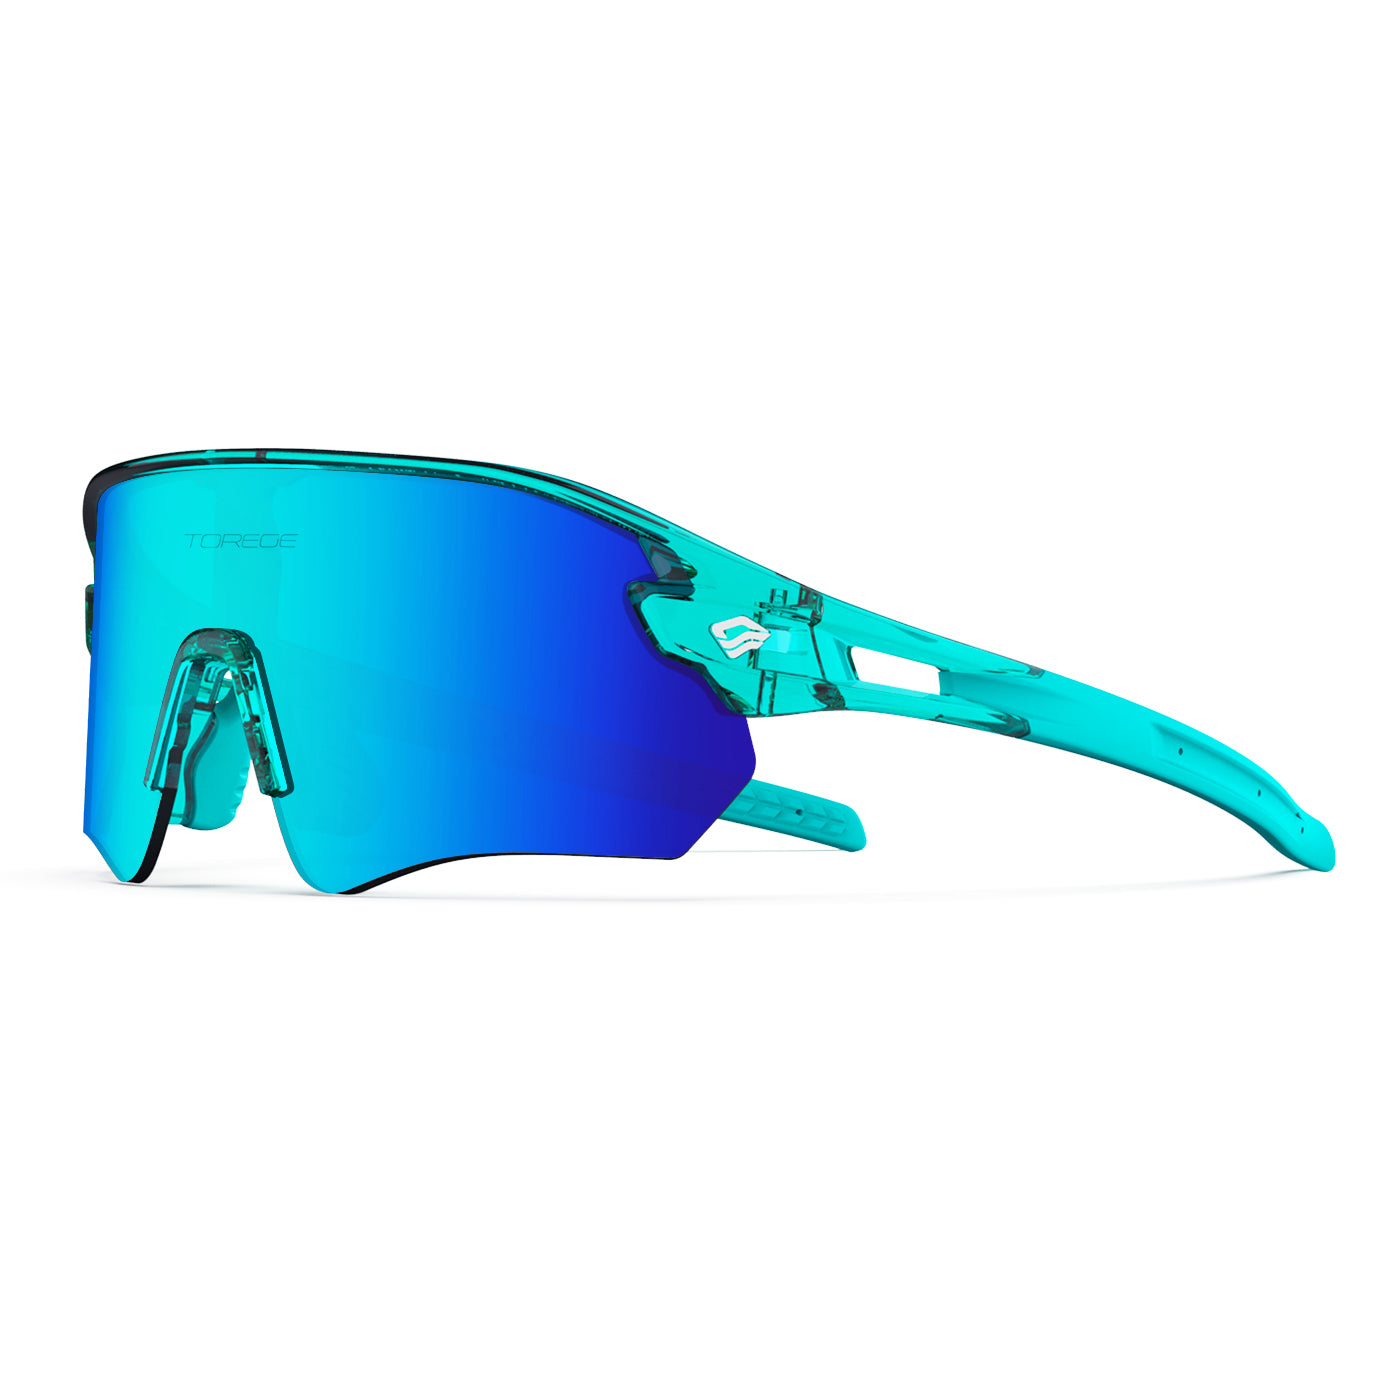 Temporal Veil Ultra Lightweight Sports Sunglasses for Men & Women with Lifetime Warranty - Ideal for Cycling, Hiking, Fishing, Golf & Running - Deep